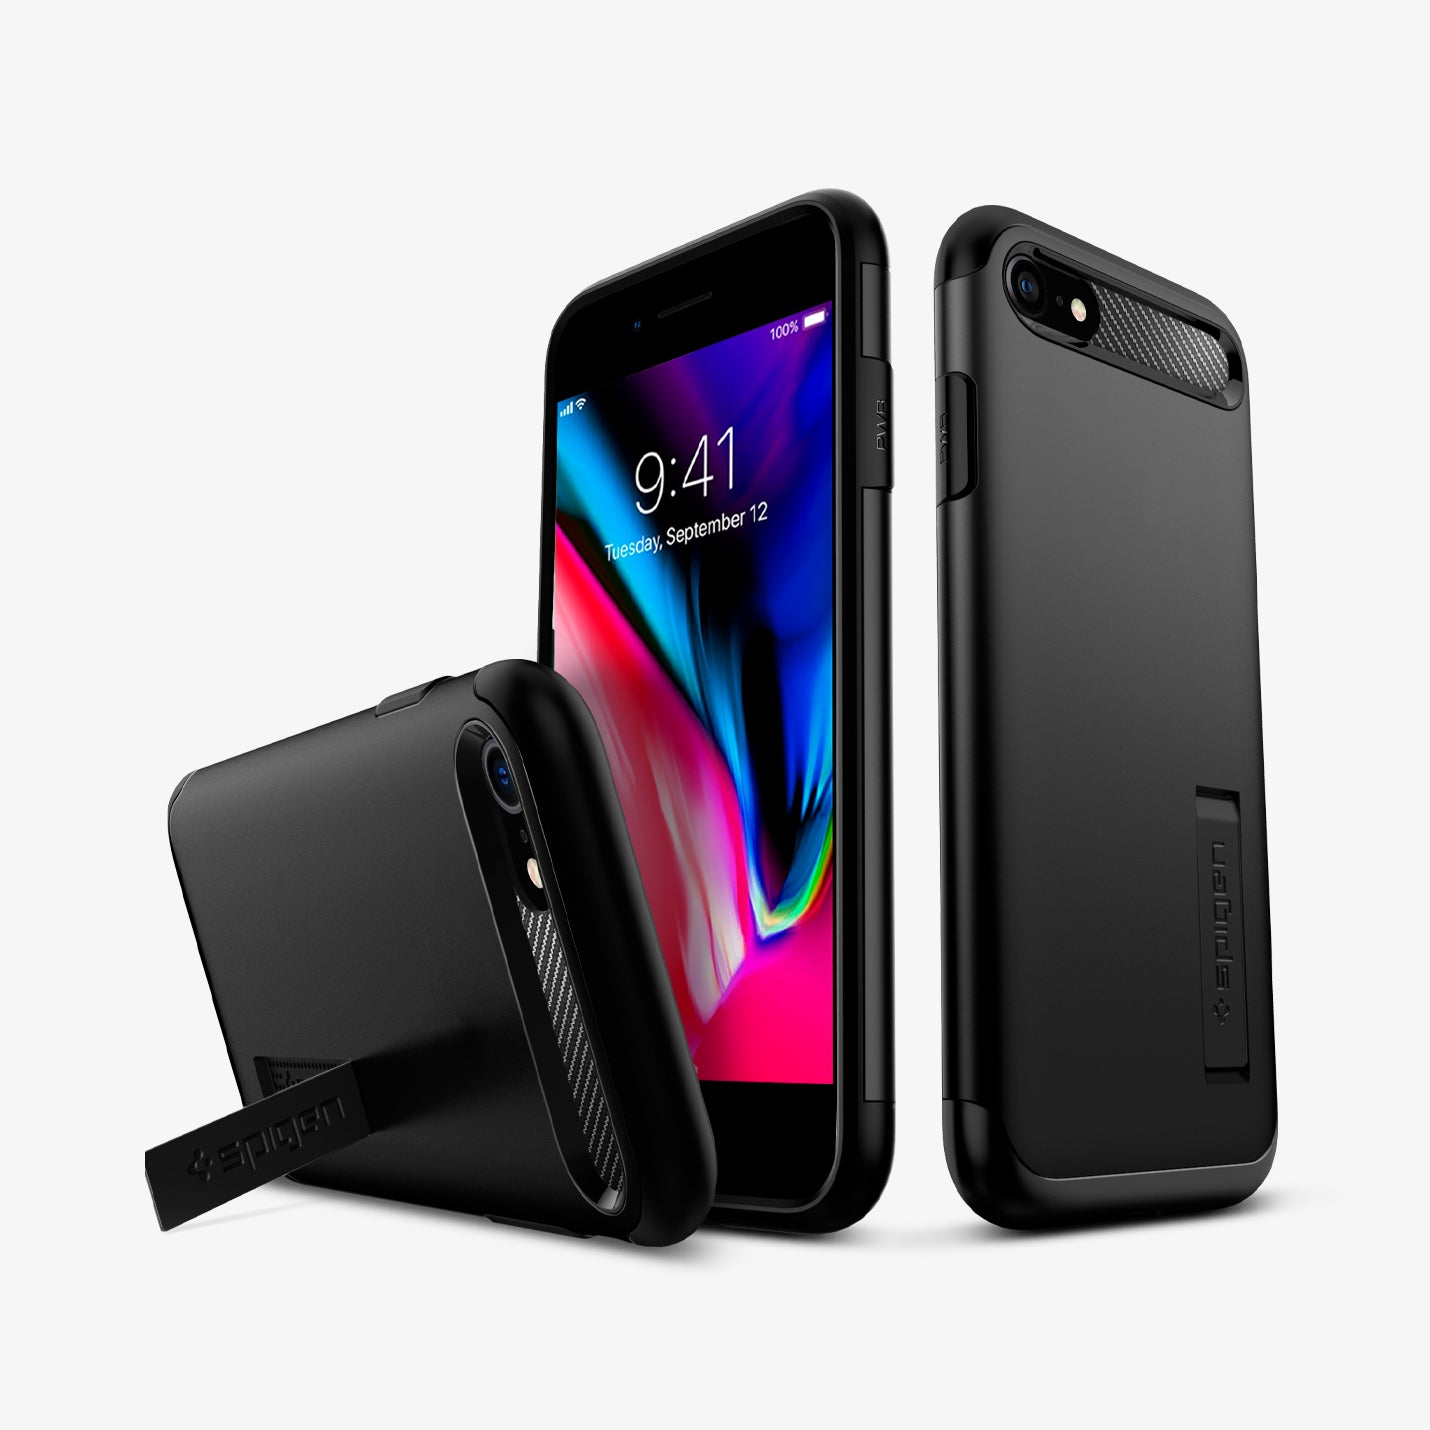 ACS00886 - iPhone 7 Series Slim Armor Case in Black showing the back, front, sides and device propped up by built in kickstand